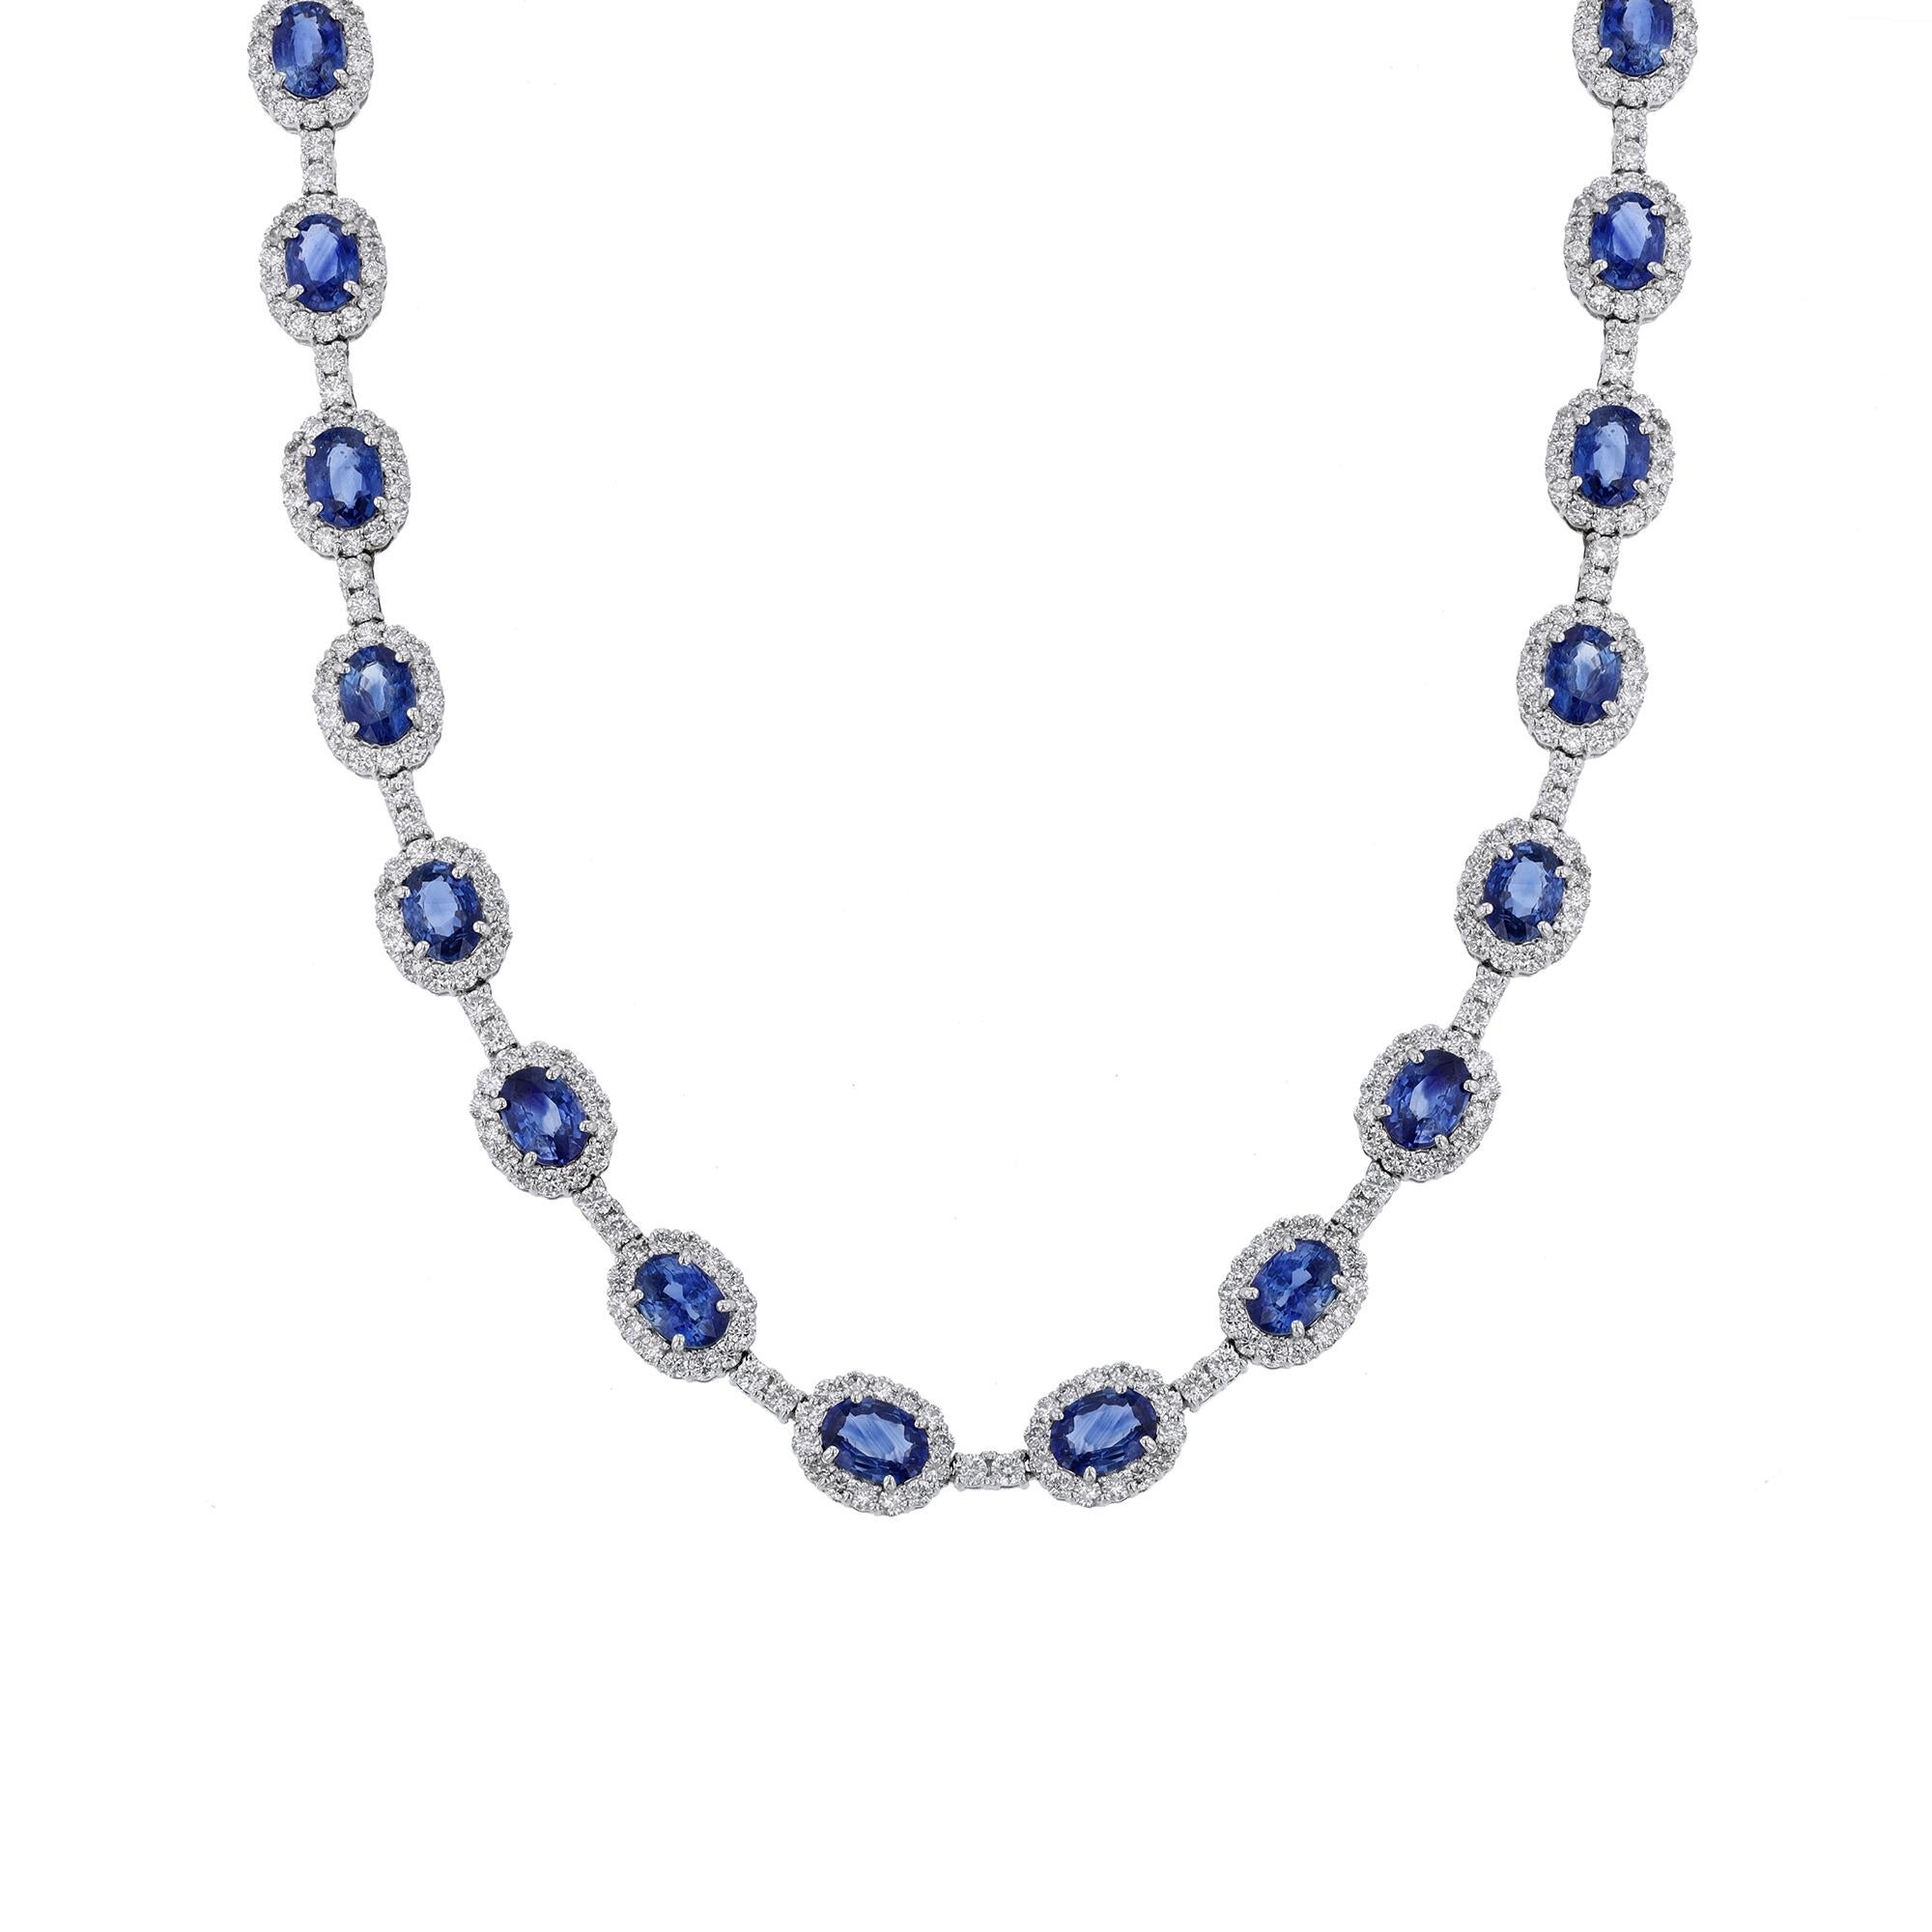 This necklace is made in 18K white gold and features an 27 oval blue sapphires weighing 27.05 carat. Surrounded by 434 round cut diamonds. Diamonds weighing 10.60 carats combined.  Necklace has a color grade (H). and clarity grade (SI2). All stones